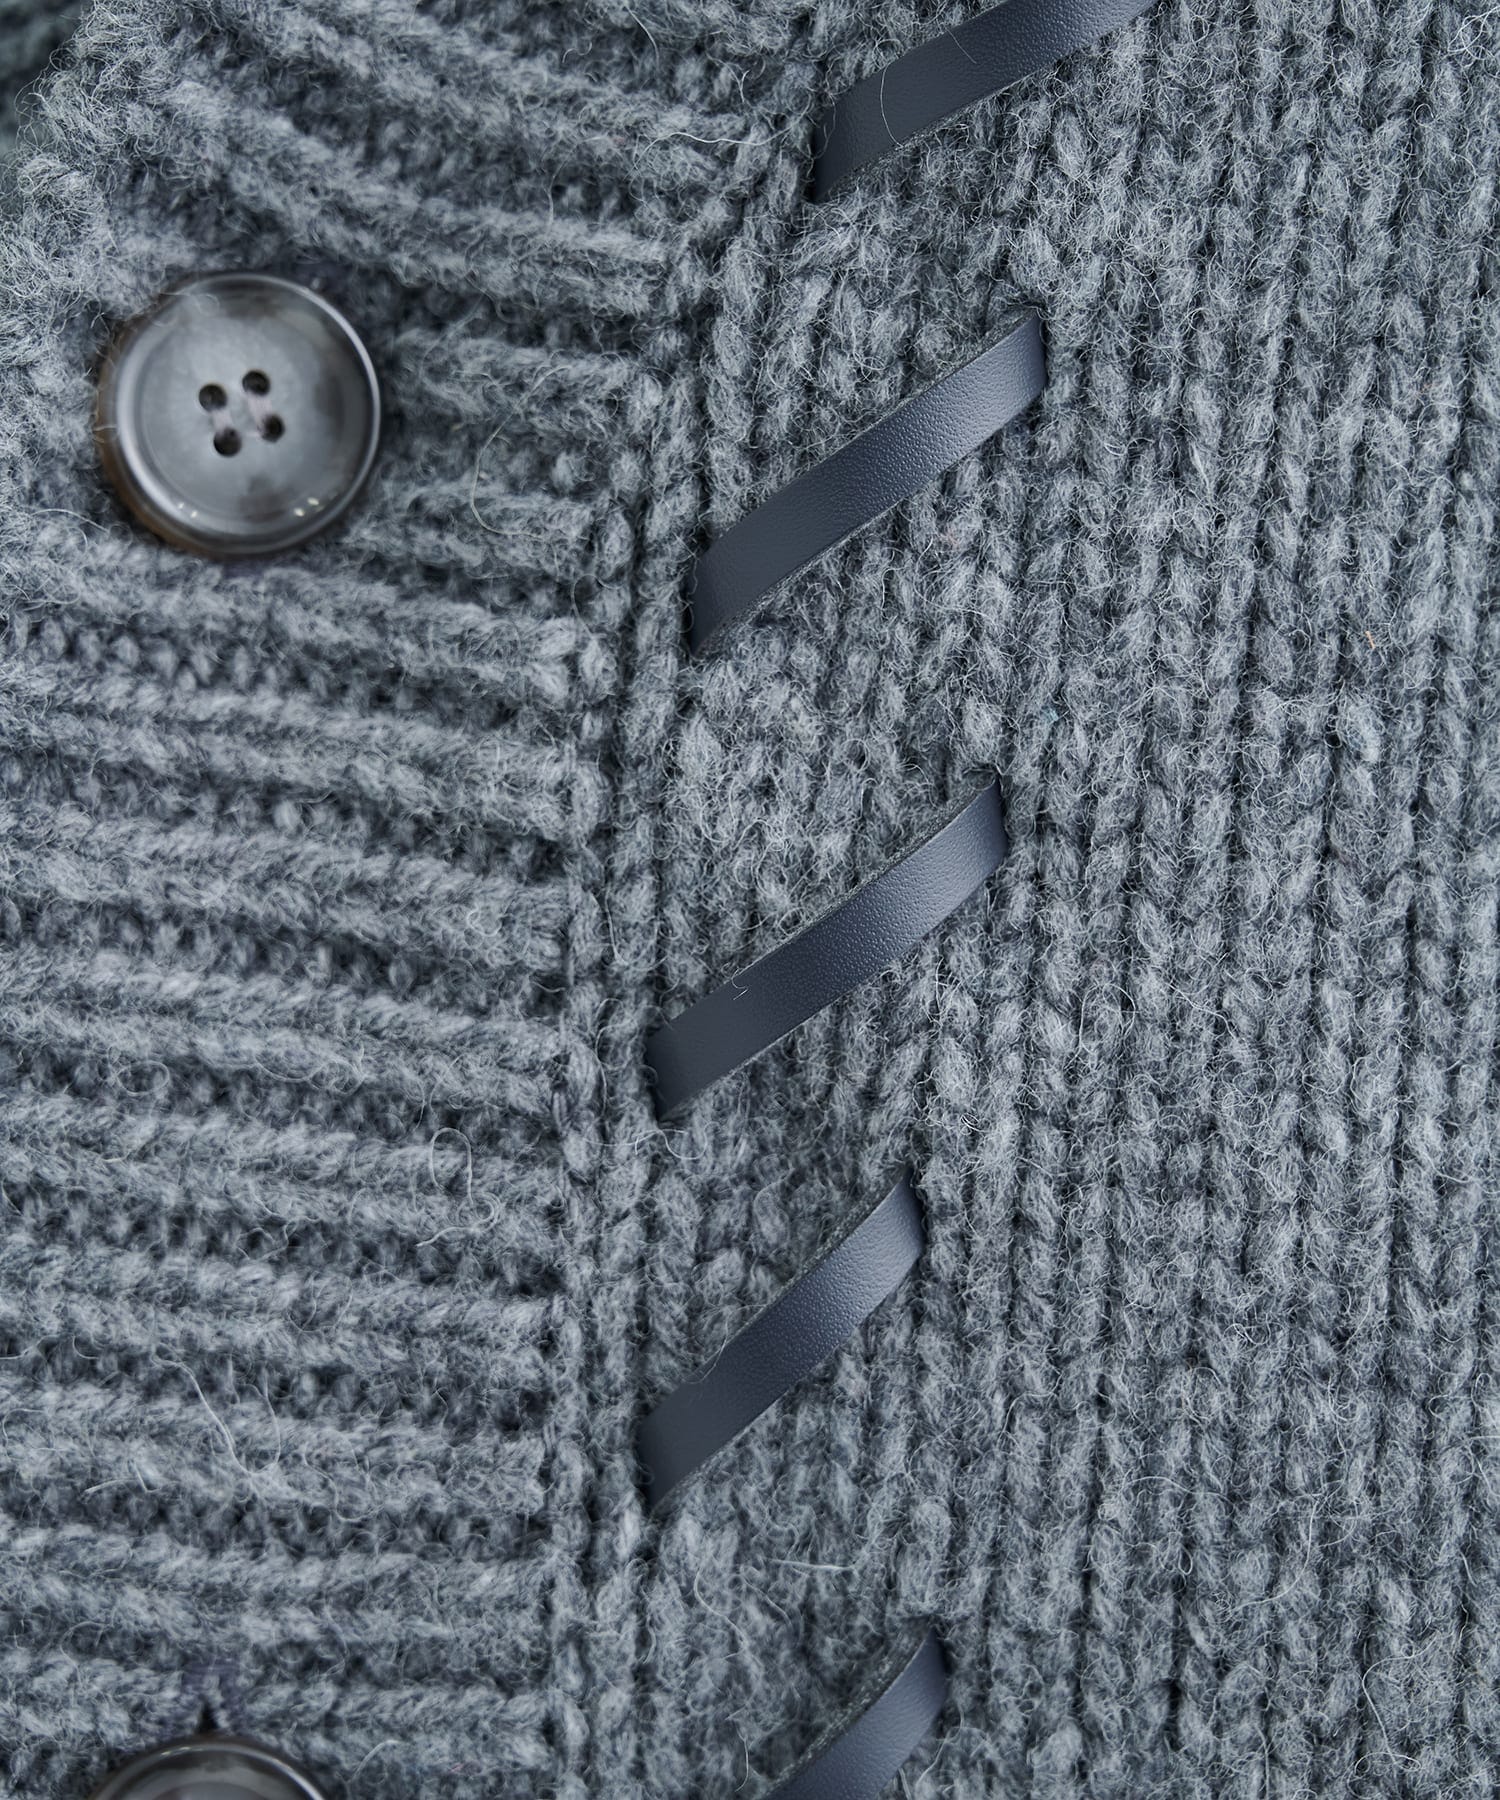 LOOPING KNIT CARDIGAN DISCOVERED